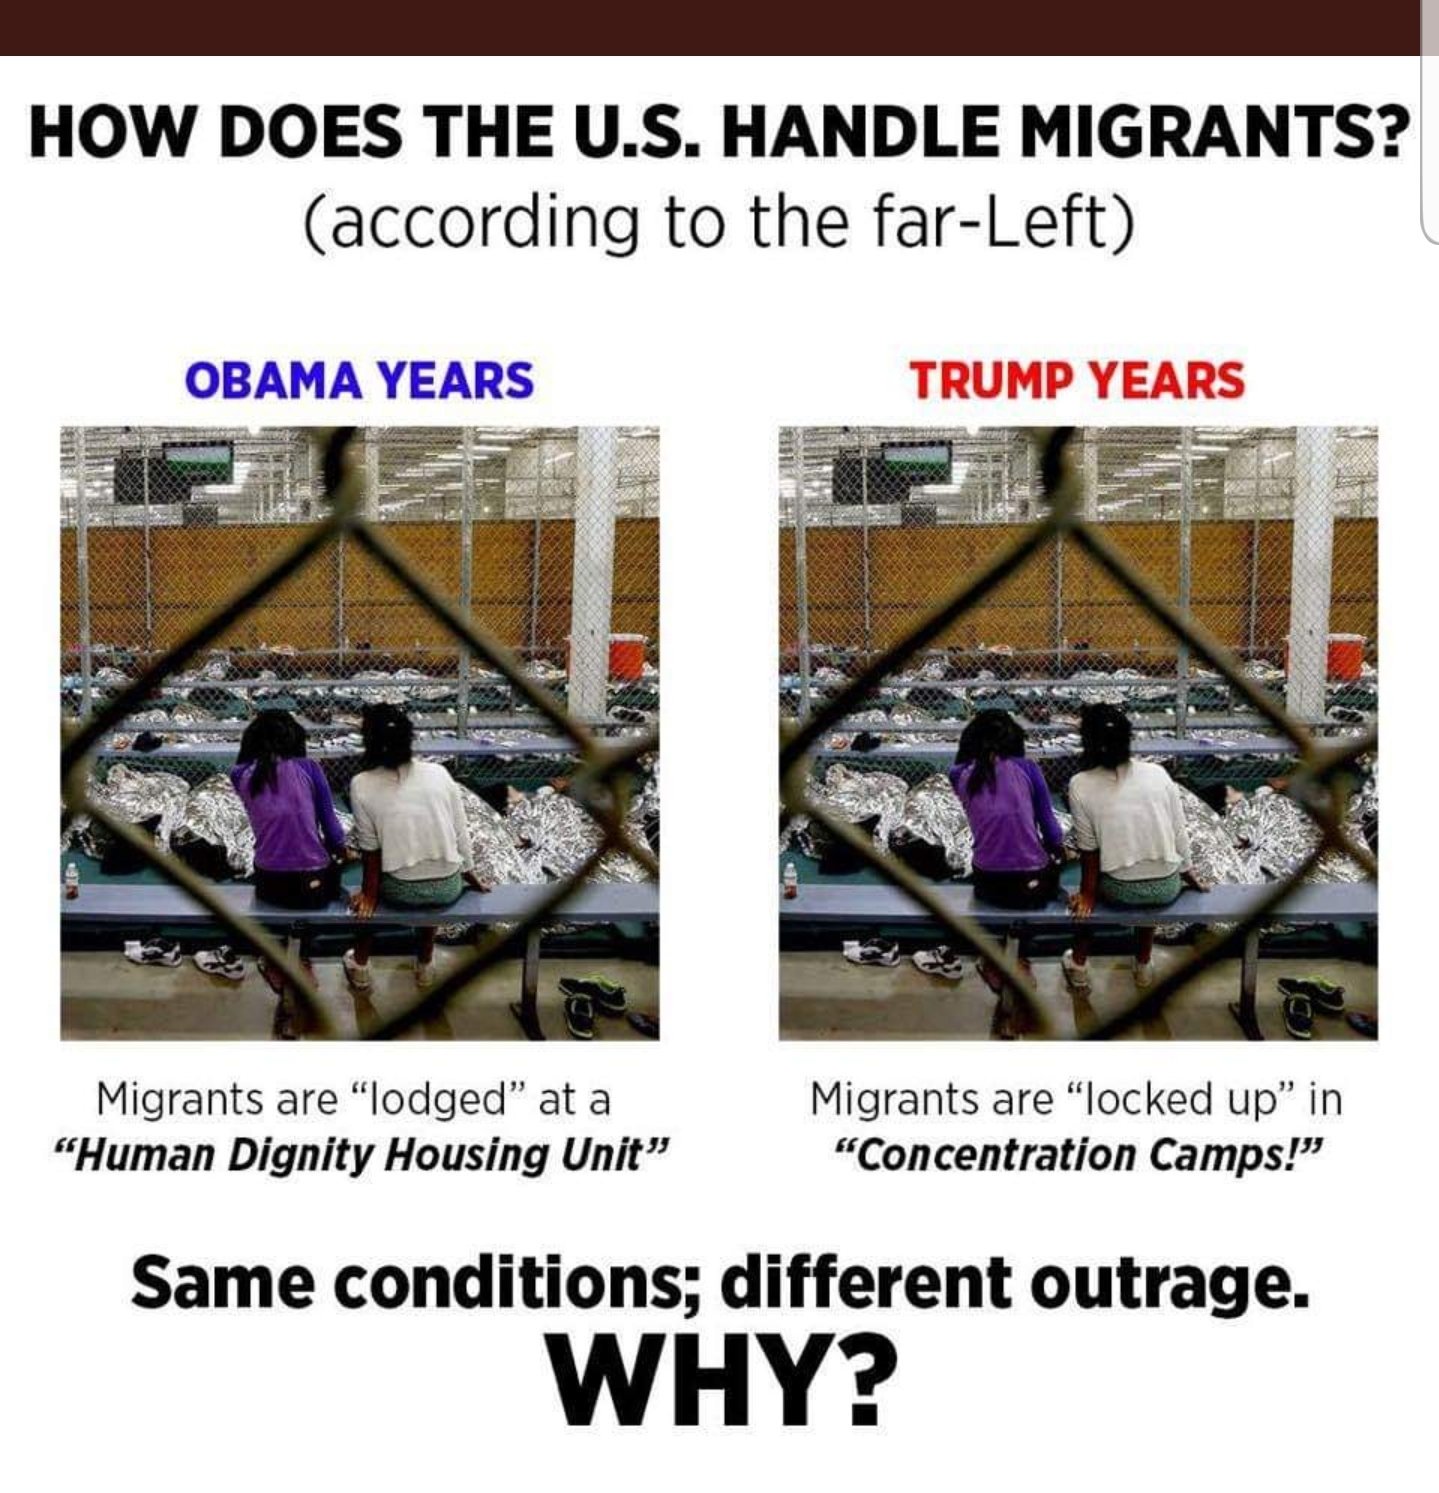 How Does The U.S. Handle Migrants? according to the farLeft Obama Years Trump Years Migrants are "lodged at a "Human Dignity Housing Unit Migrants are "locked up" in "Concentration Camps!" Same conditions; different outrage. Why?